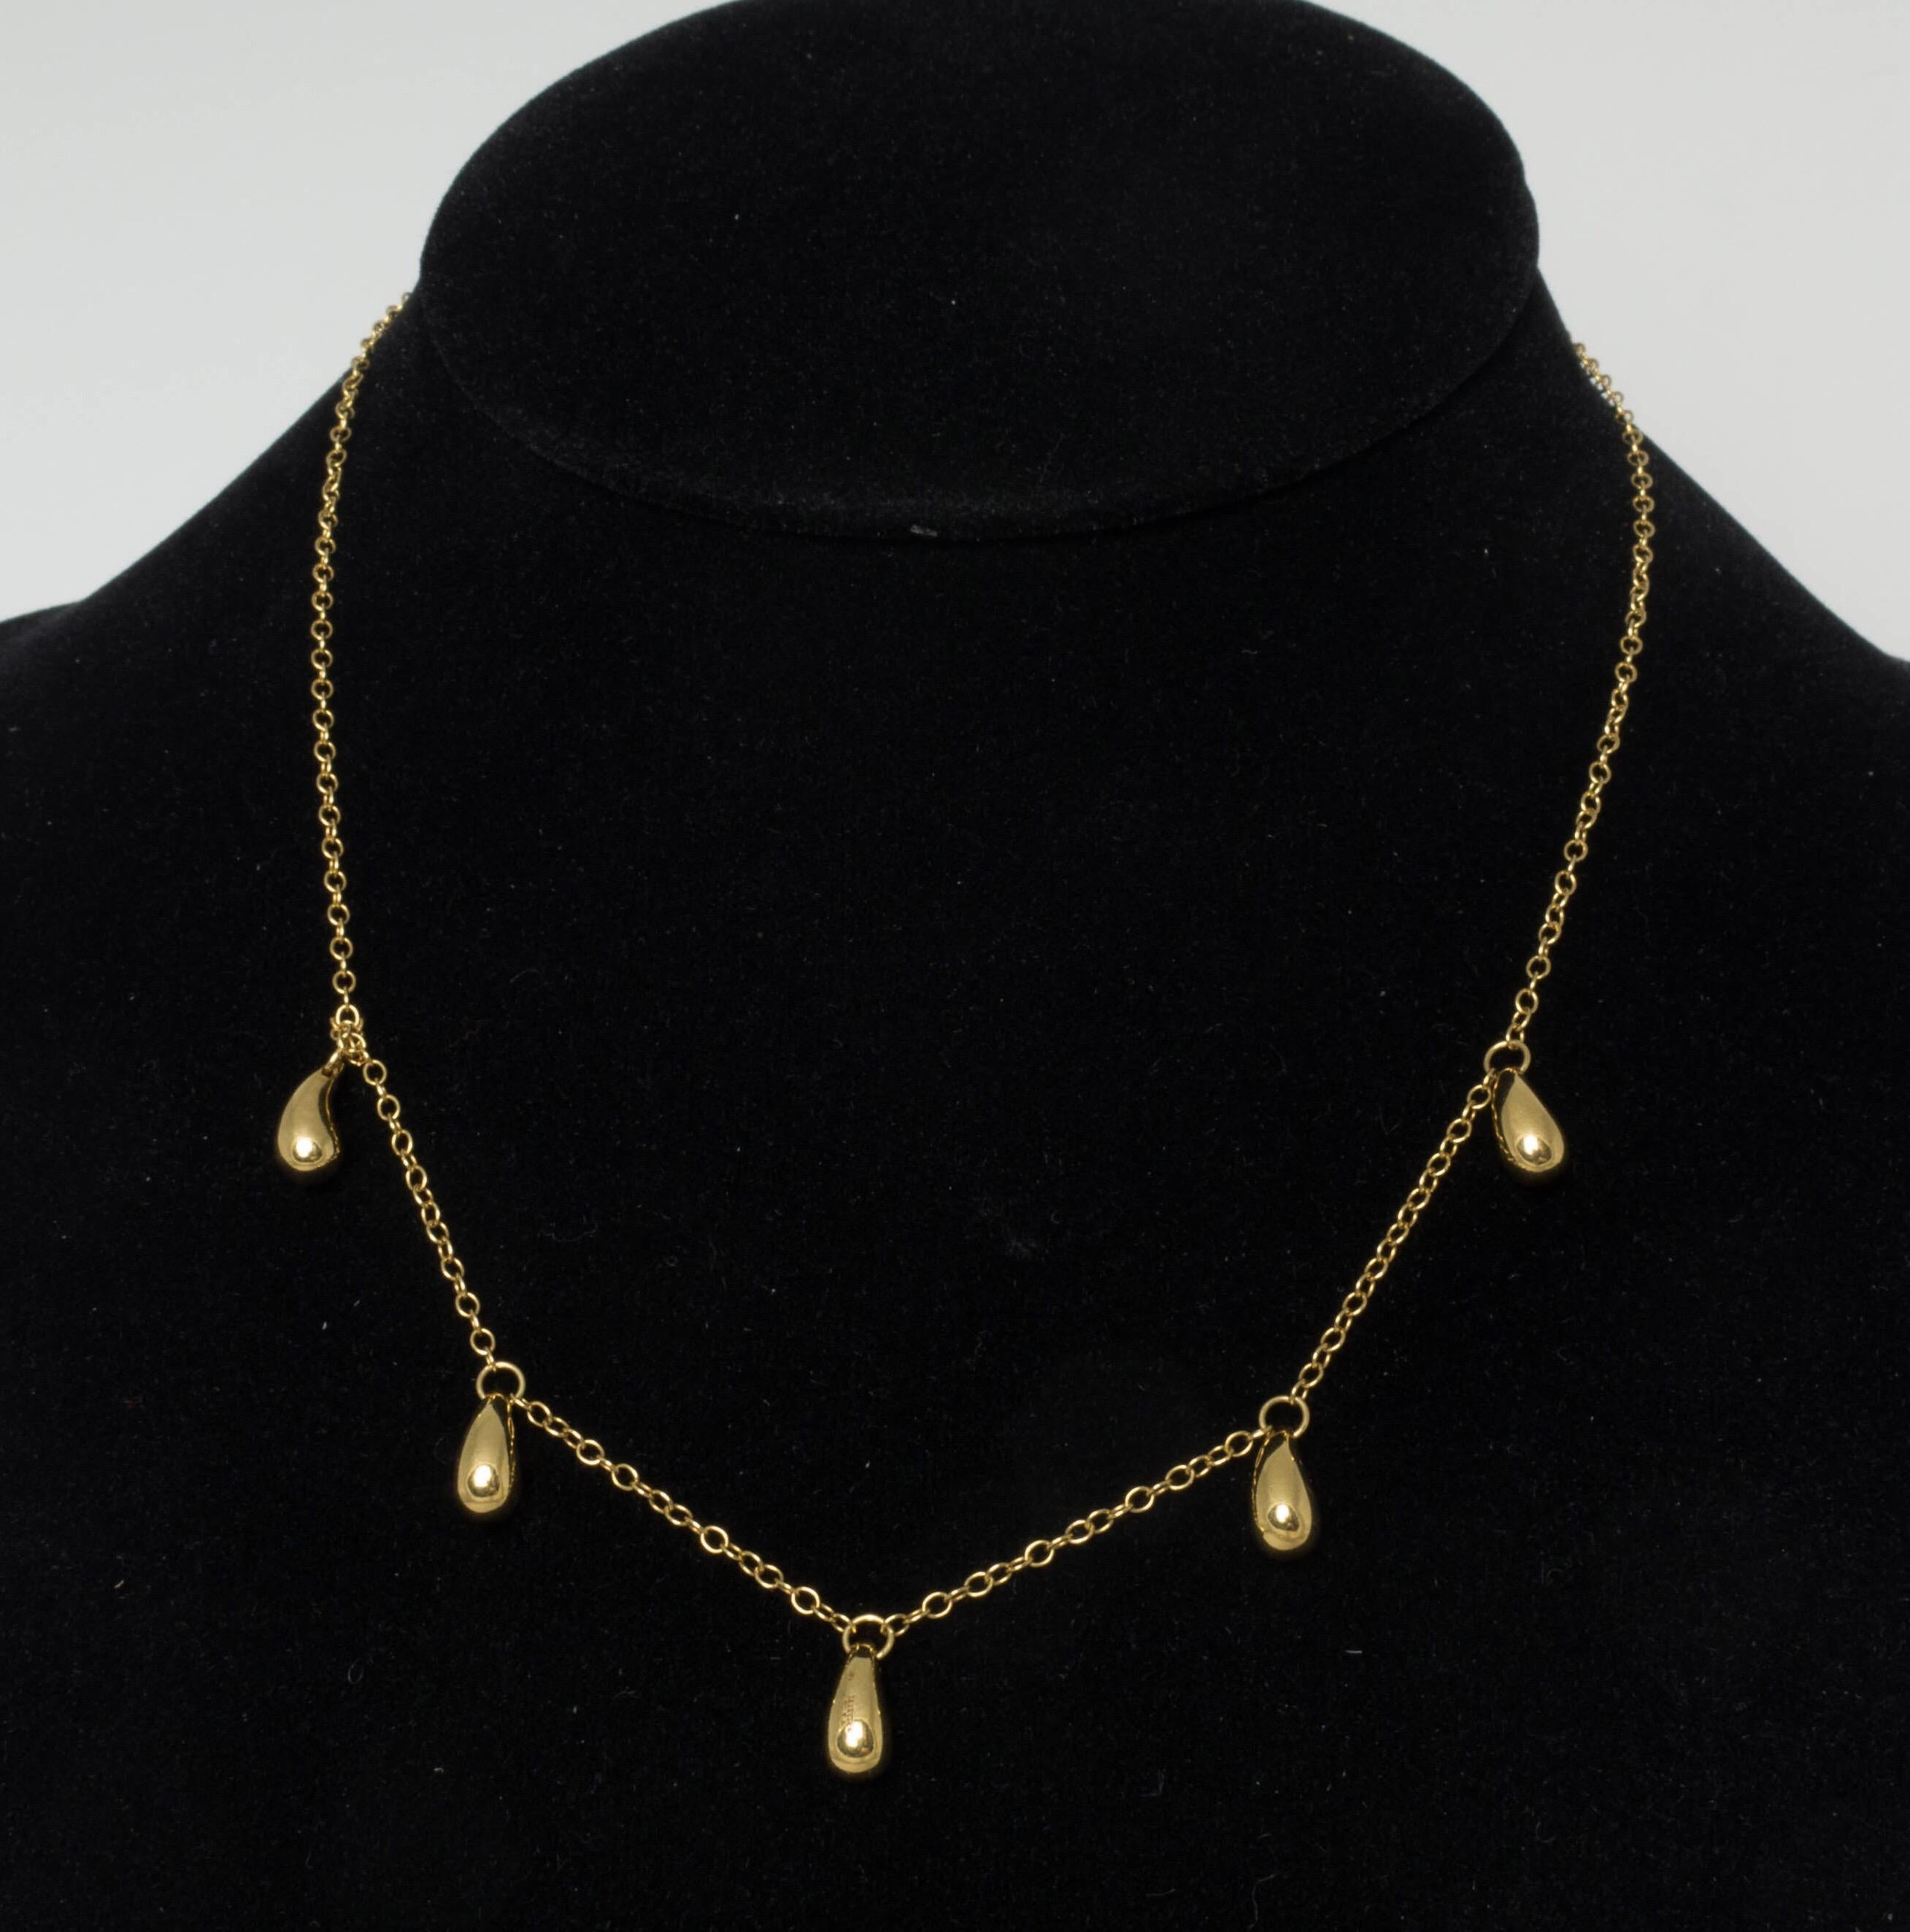 Rare five pendants 18K yellow gold Elsa Peretti iconic tear drop design necklace by Tiffany & Co.  Necklace is 16.25 inches long. 5 Pendants are measured 3/8 inches long each. Total weight of necklace is 9.9 grams. Signed Tiffany & Co, Peretti, 750.